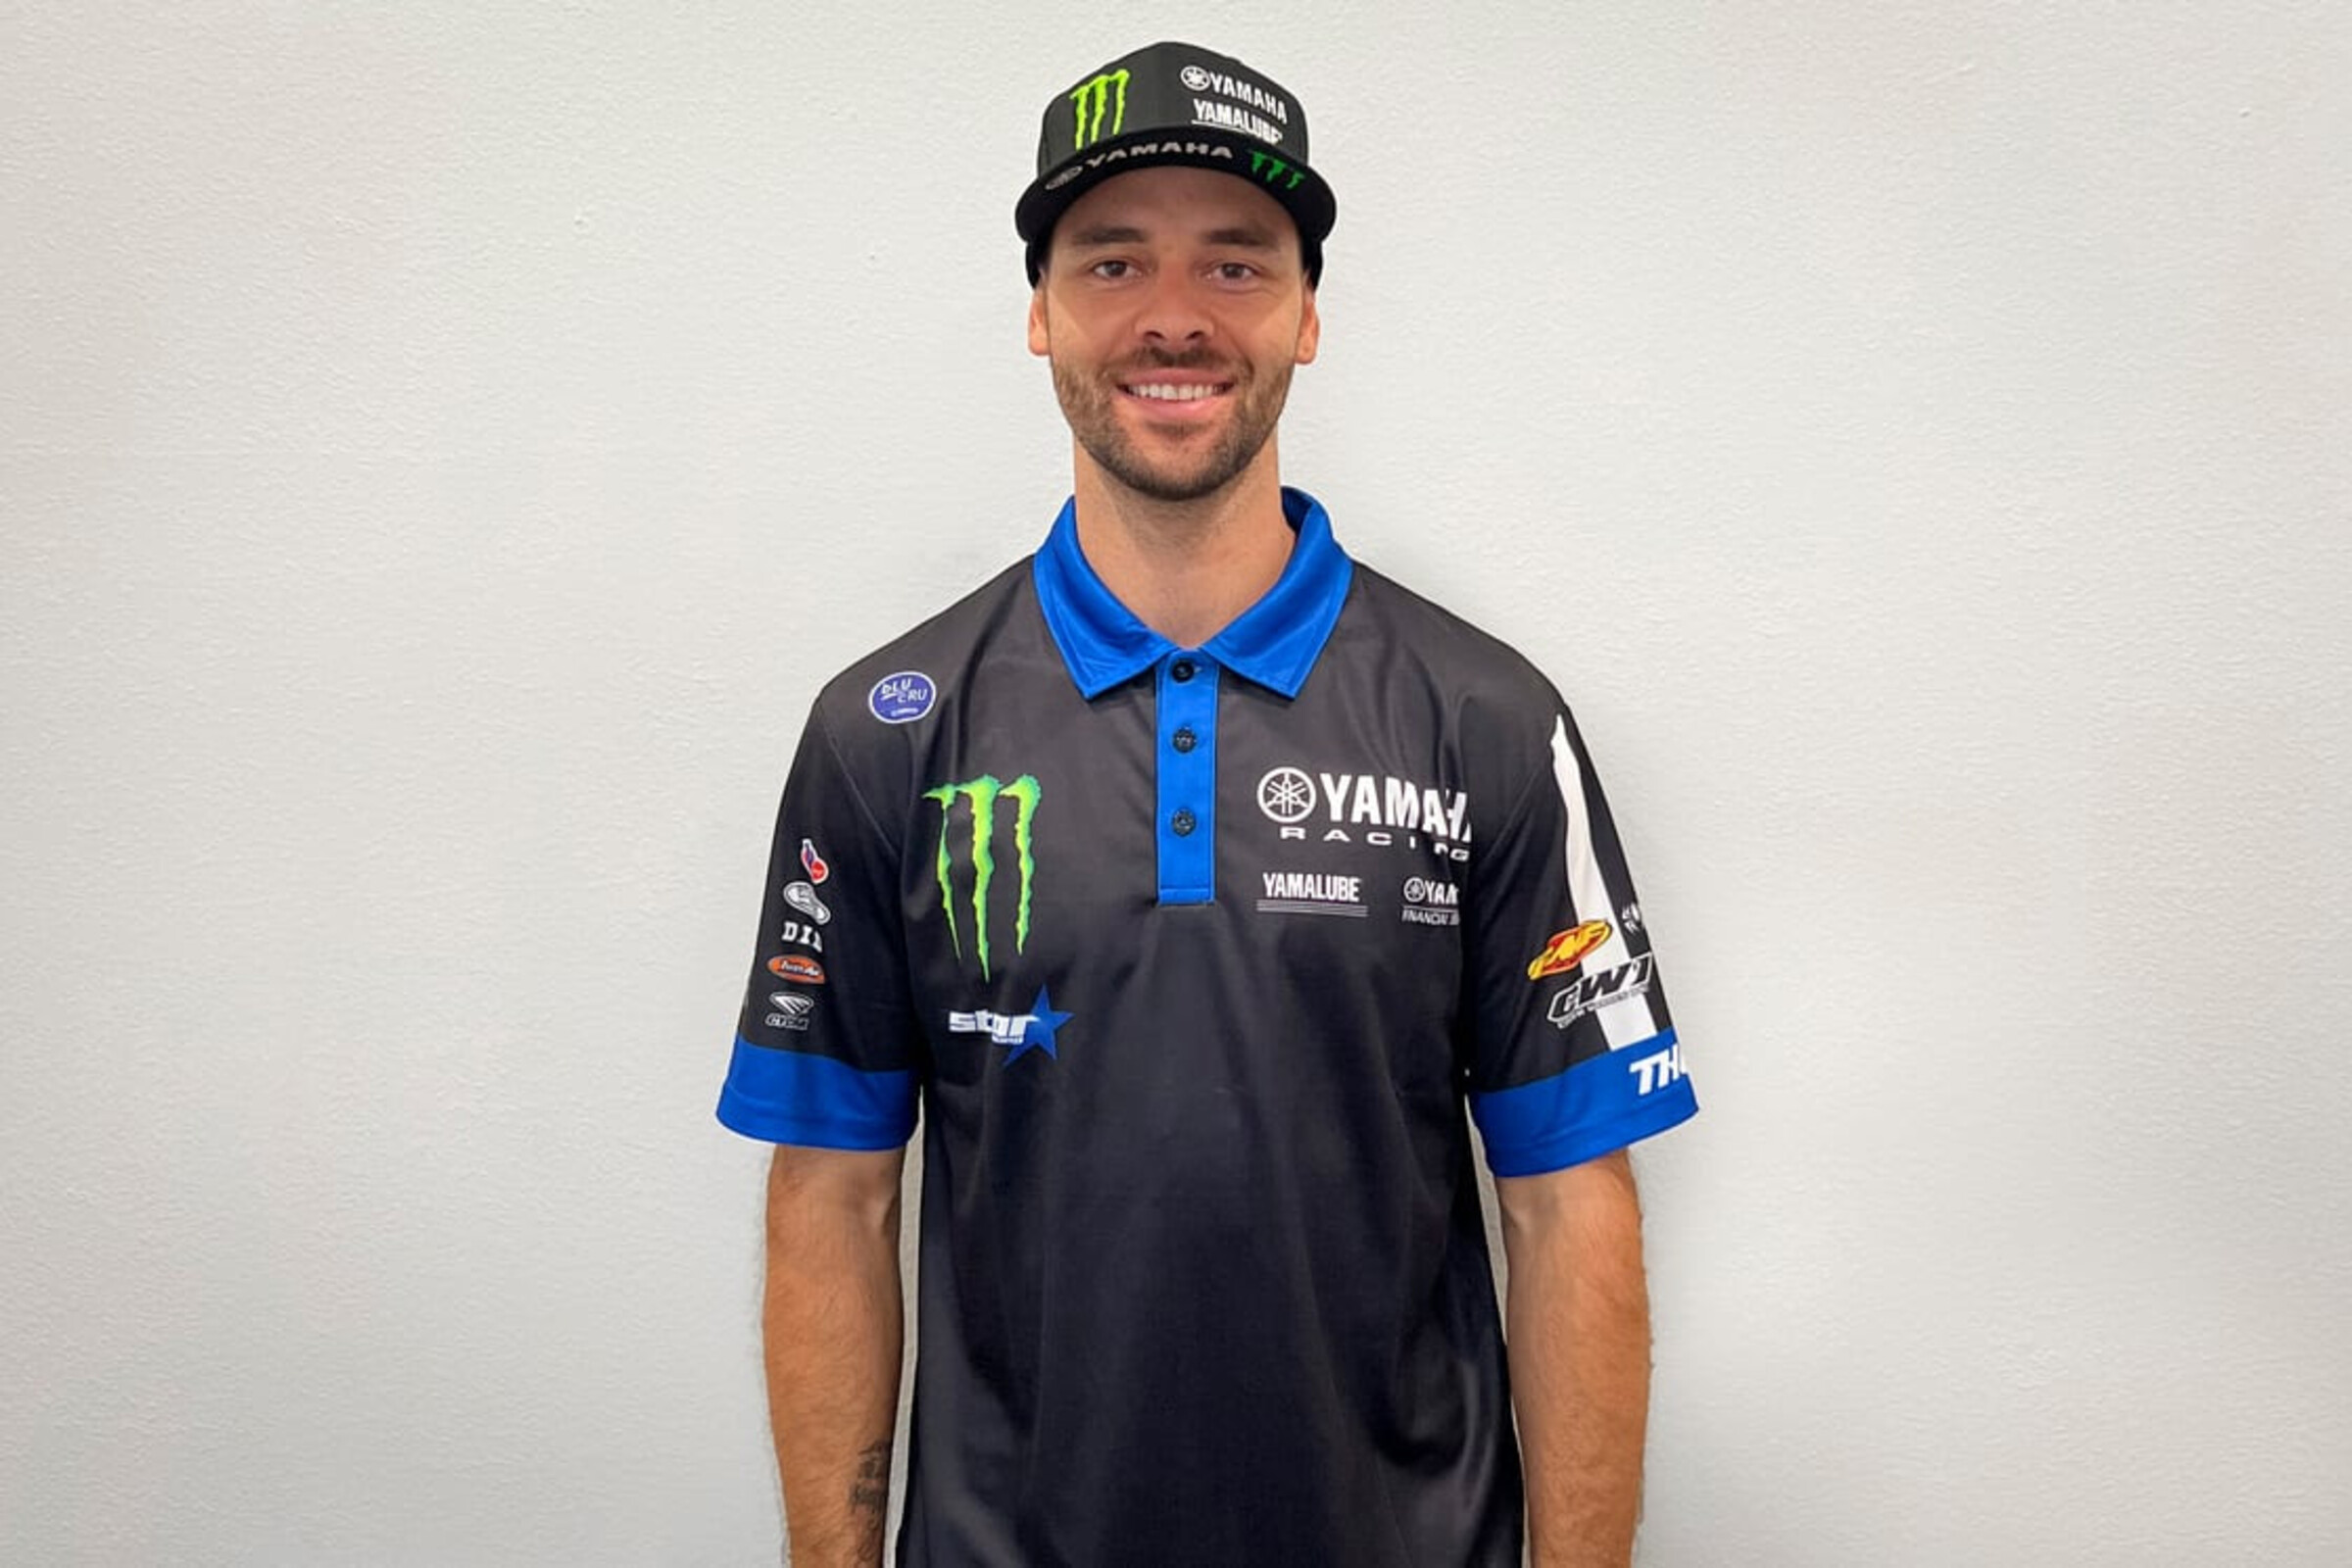 Jay Wilson to Race Final 3 Pro Motocross Rounds with Star Yamaha